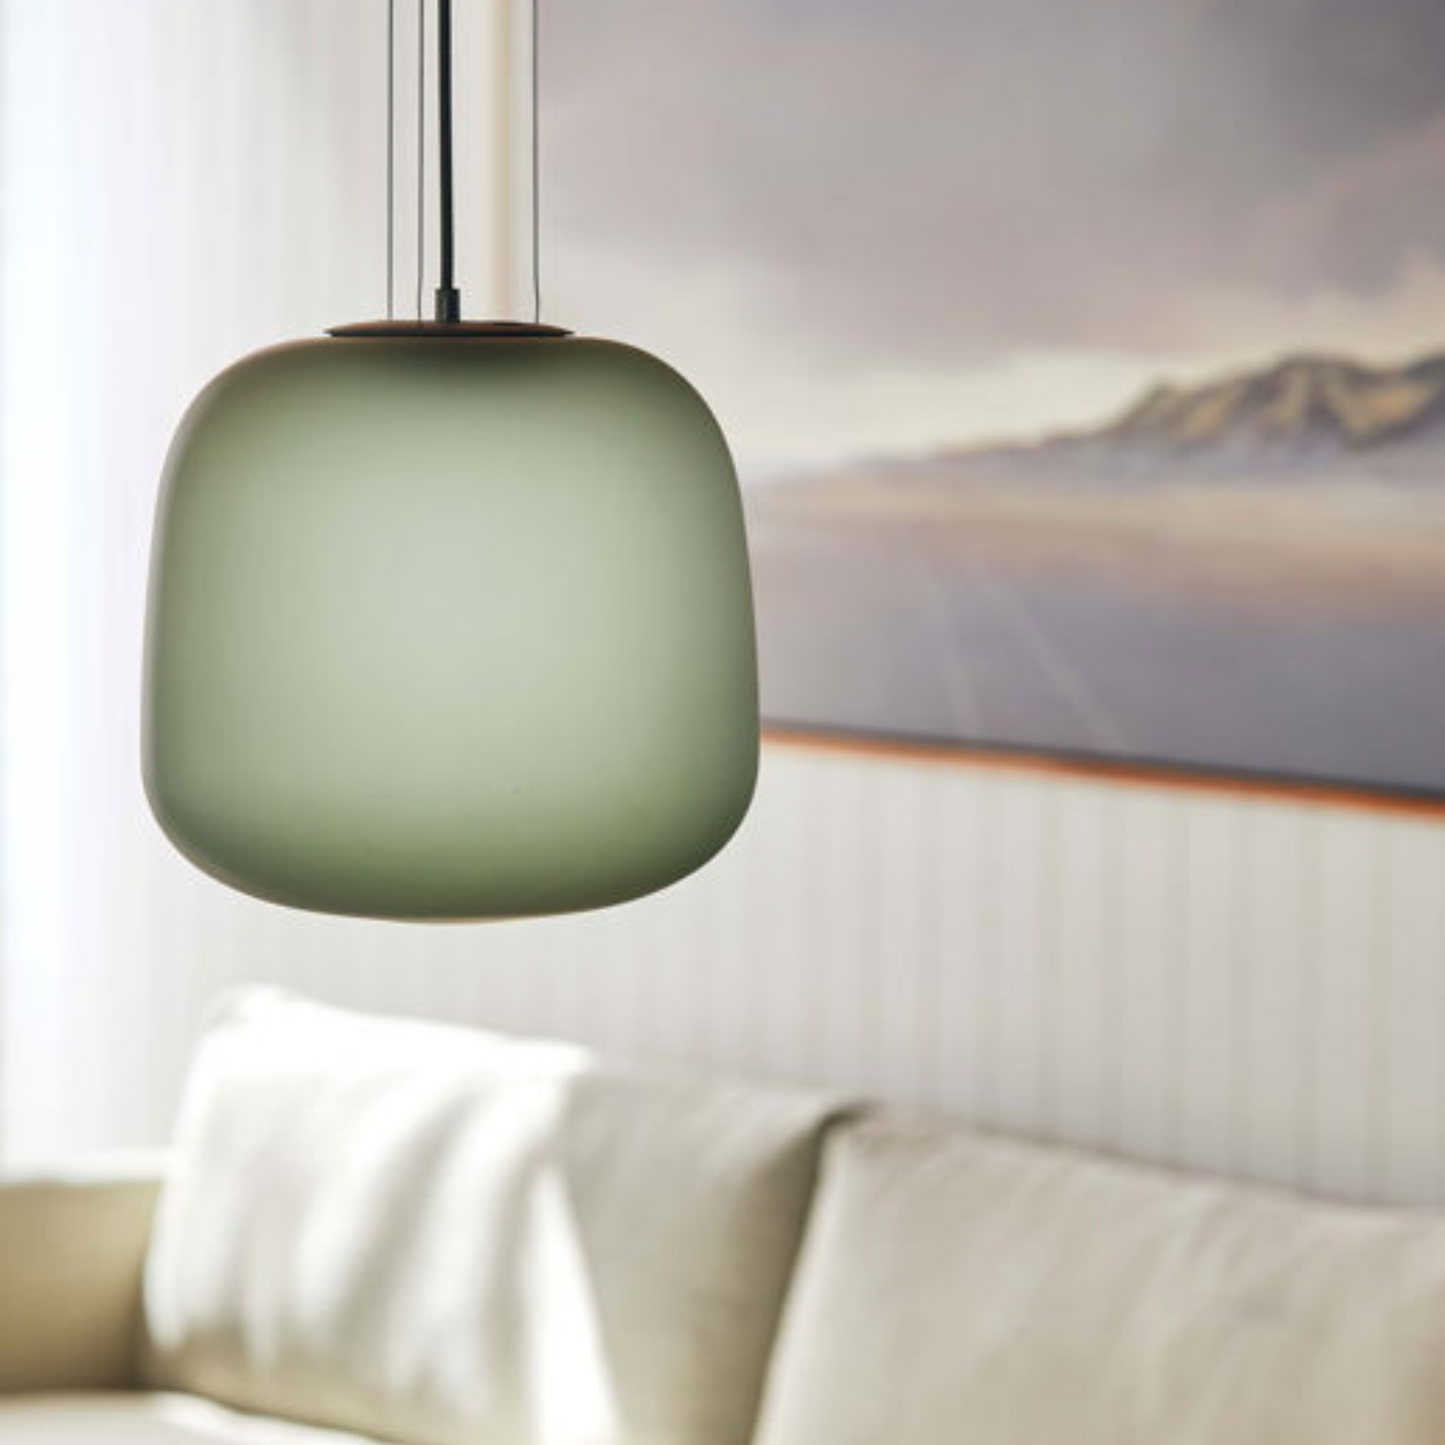 AB Small Pendant - Frosted Smoke Grey/Green